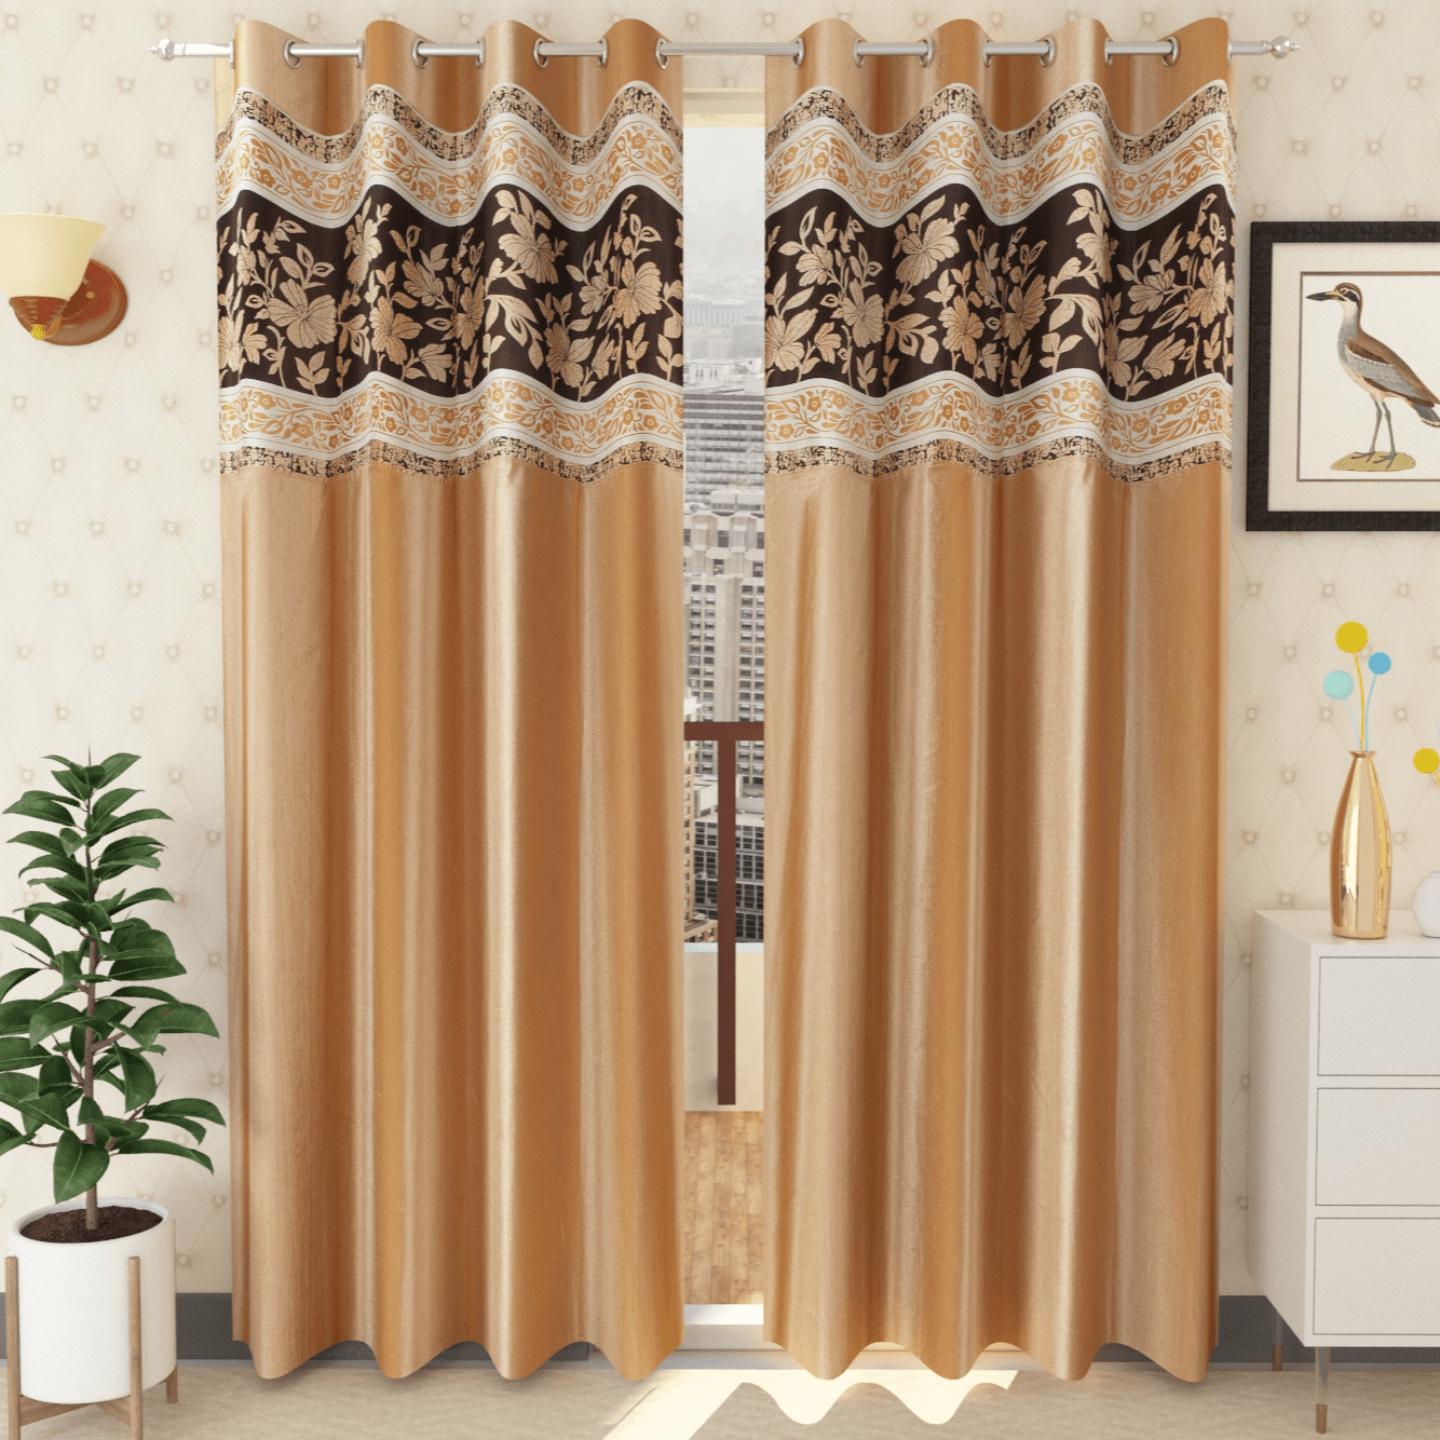 Handtex Home Patchwork curtain for door 7 feet set of 2pc Gold color